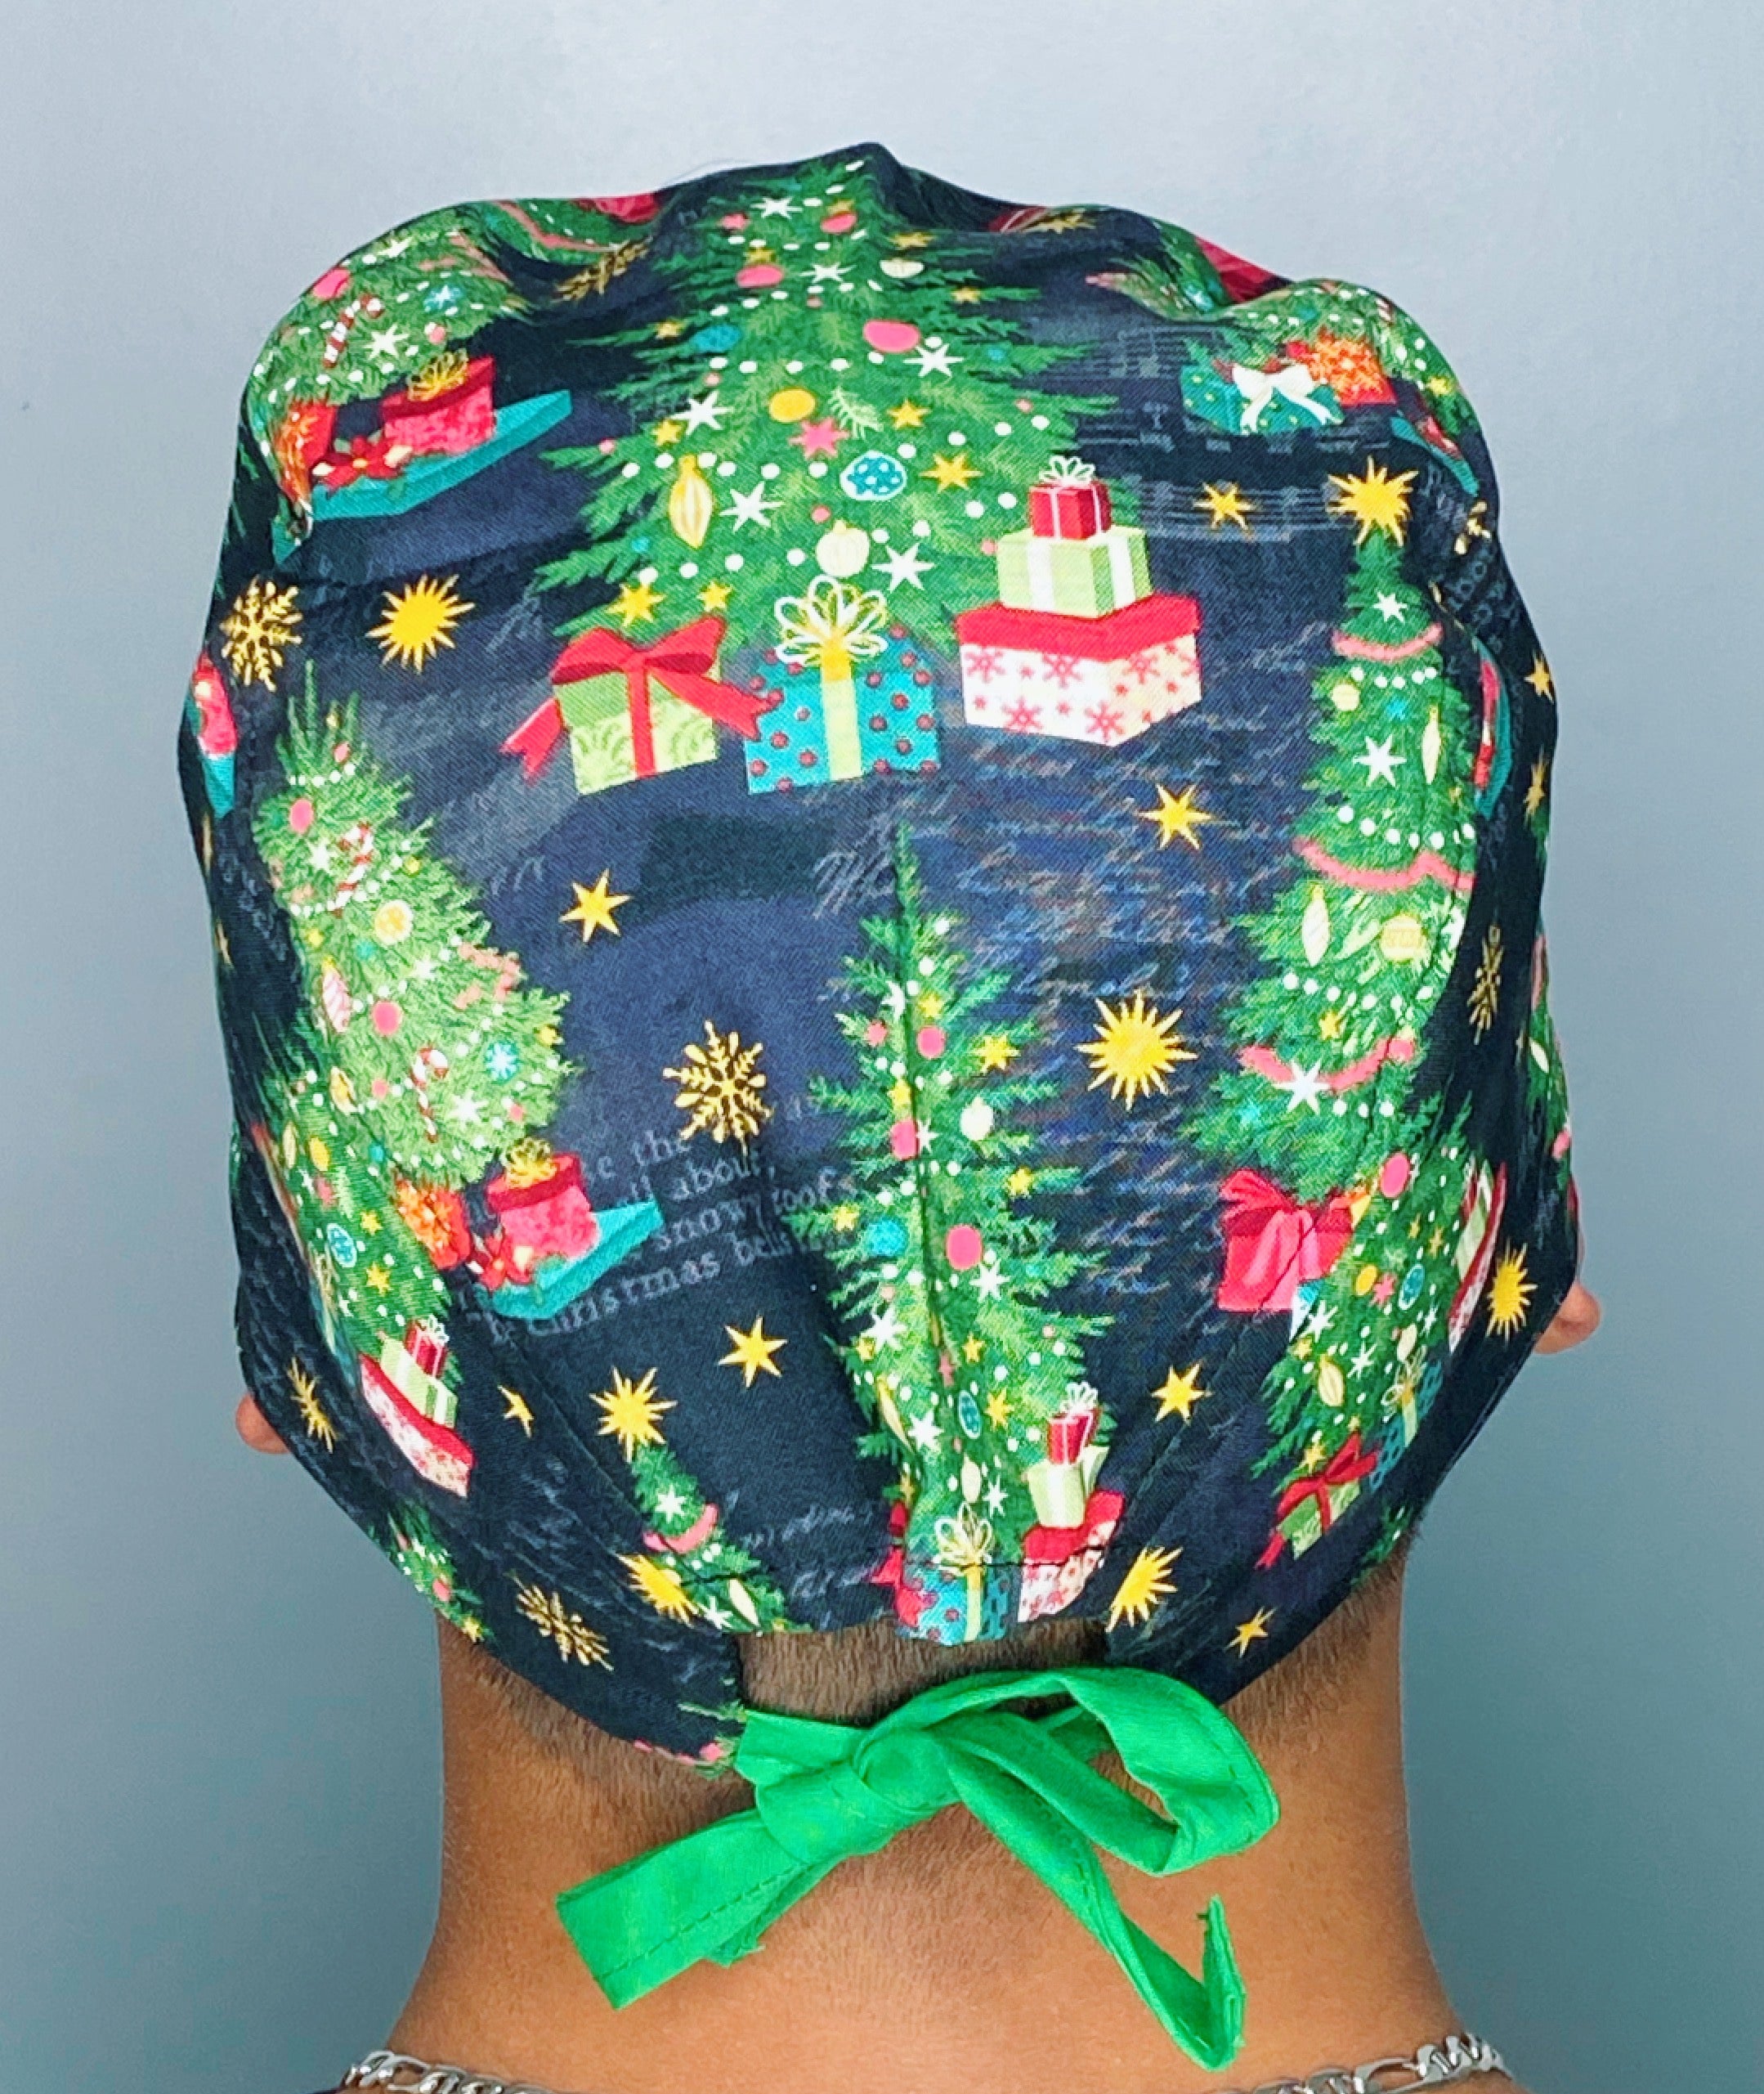 Christmas Trees & Gifts Christmas/Winter themed Unisex Holiday Scrub Cap